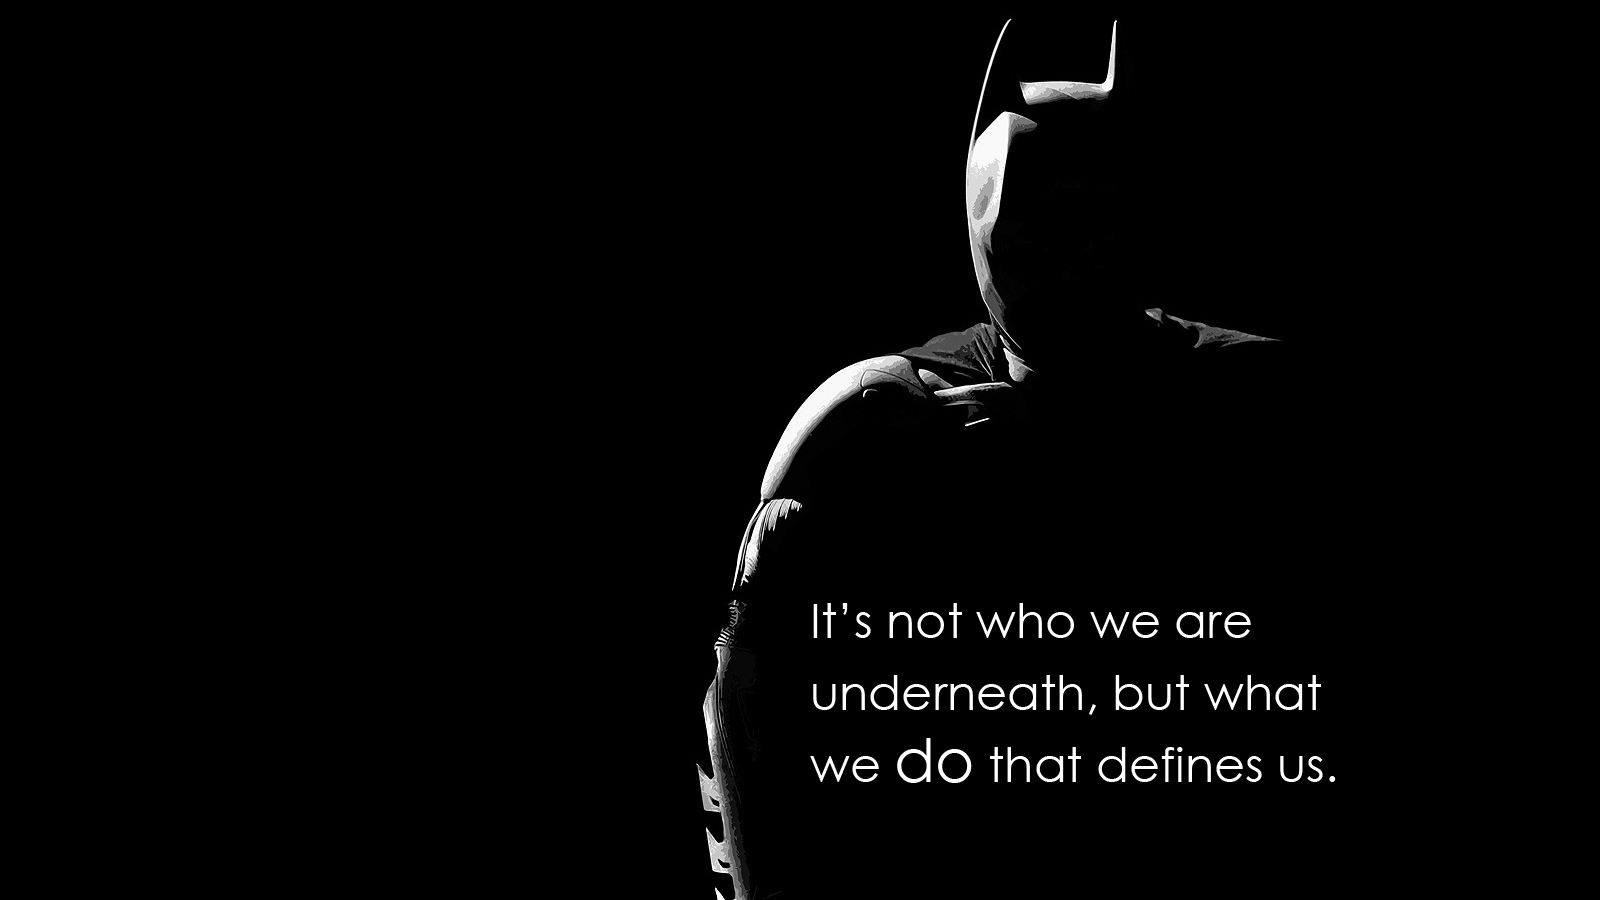 Made Another Batman Wallpaper With One Of My Favourite Quotes